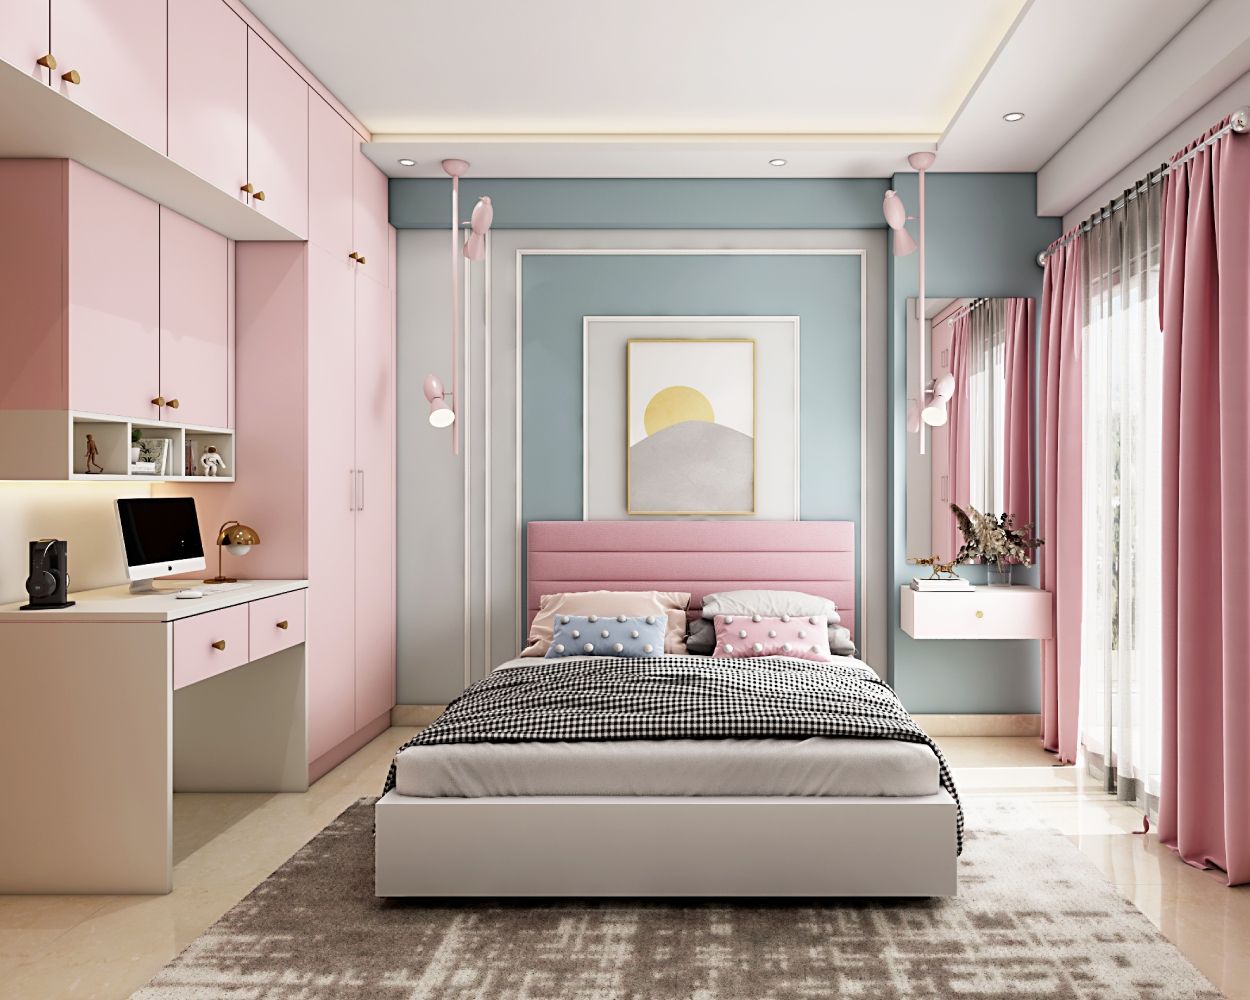 Modern Kids Bedroom Design For Girls With Pink 2-Door Wardrobe And Integrated Study Table